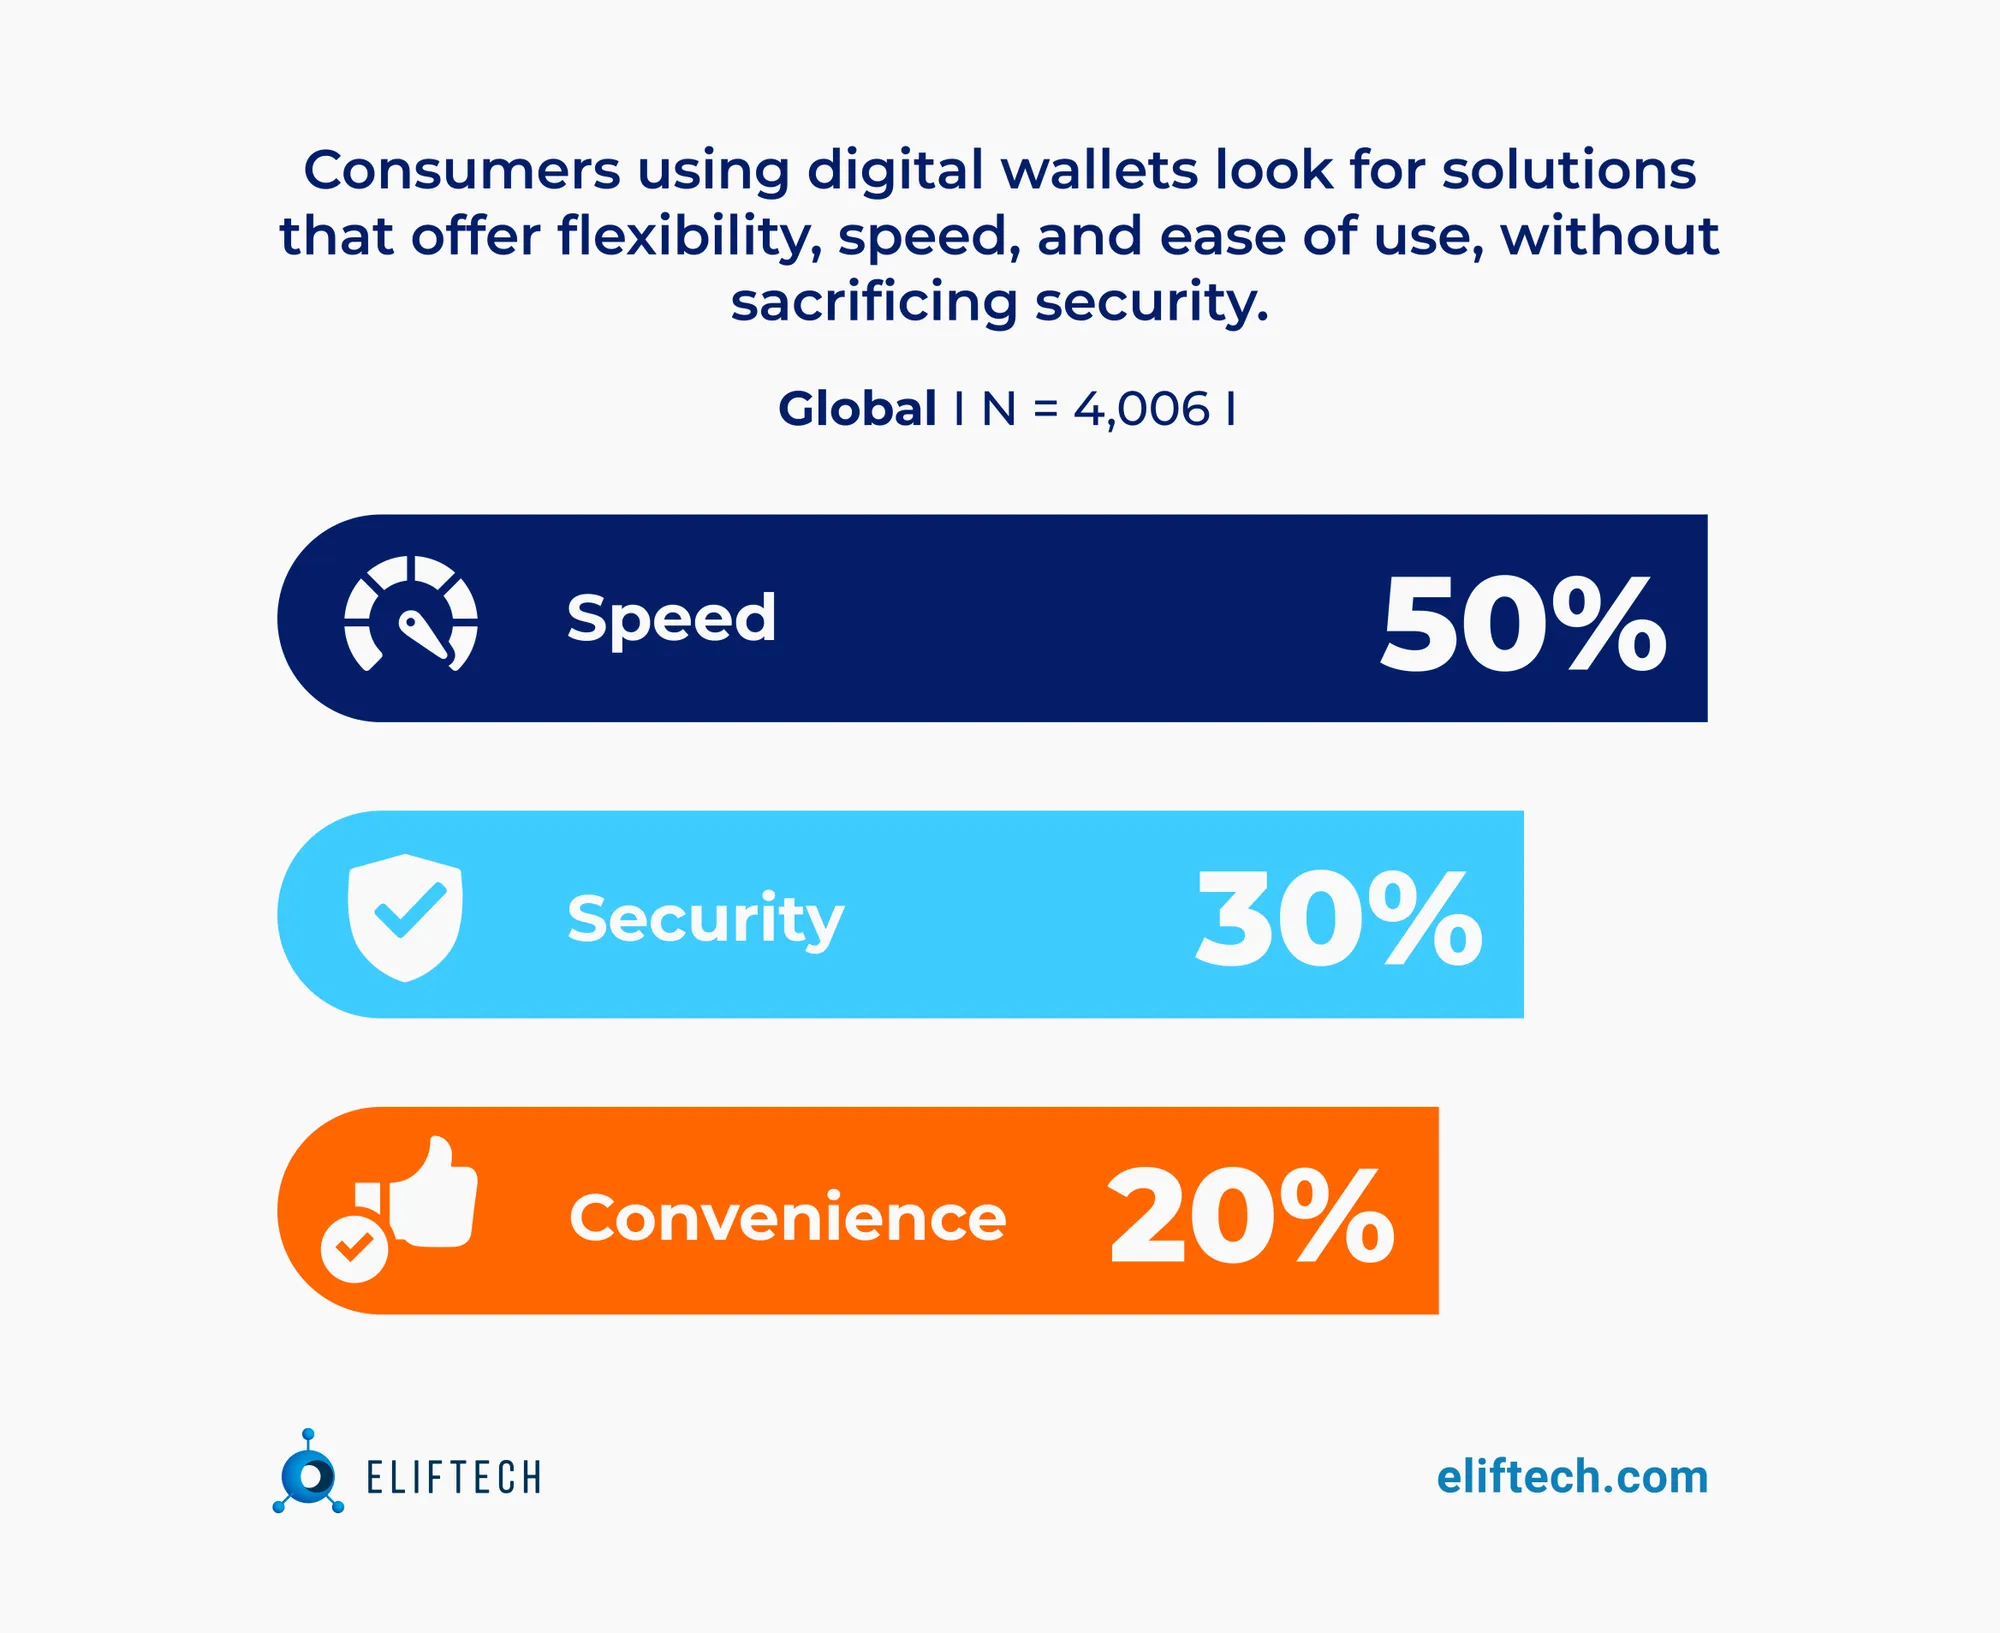 Why consumers use digital wallets